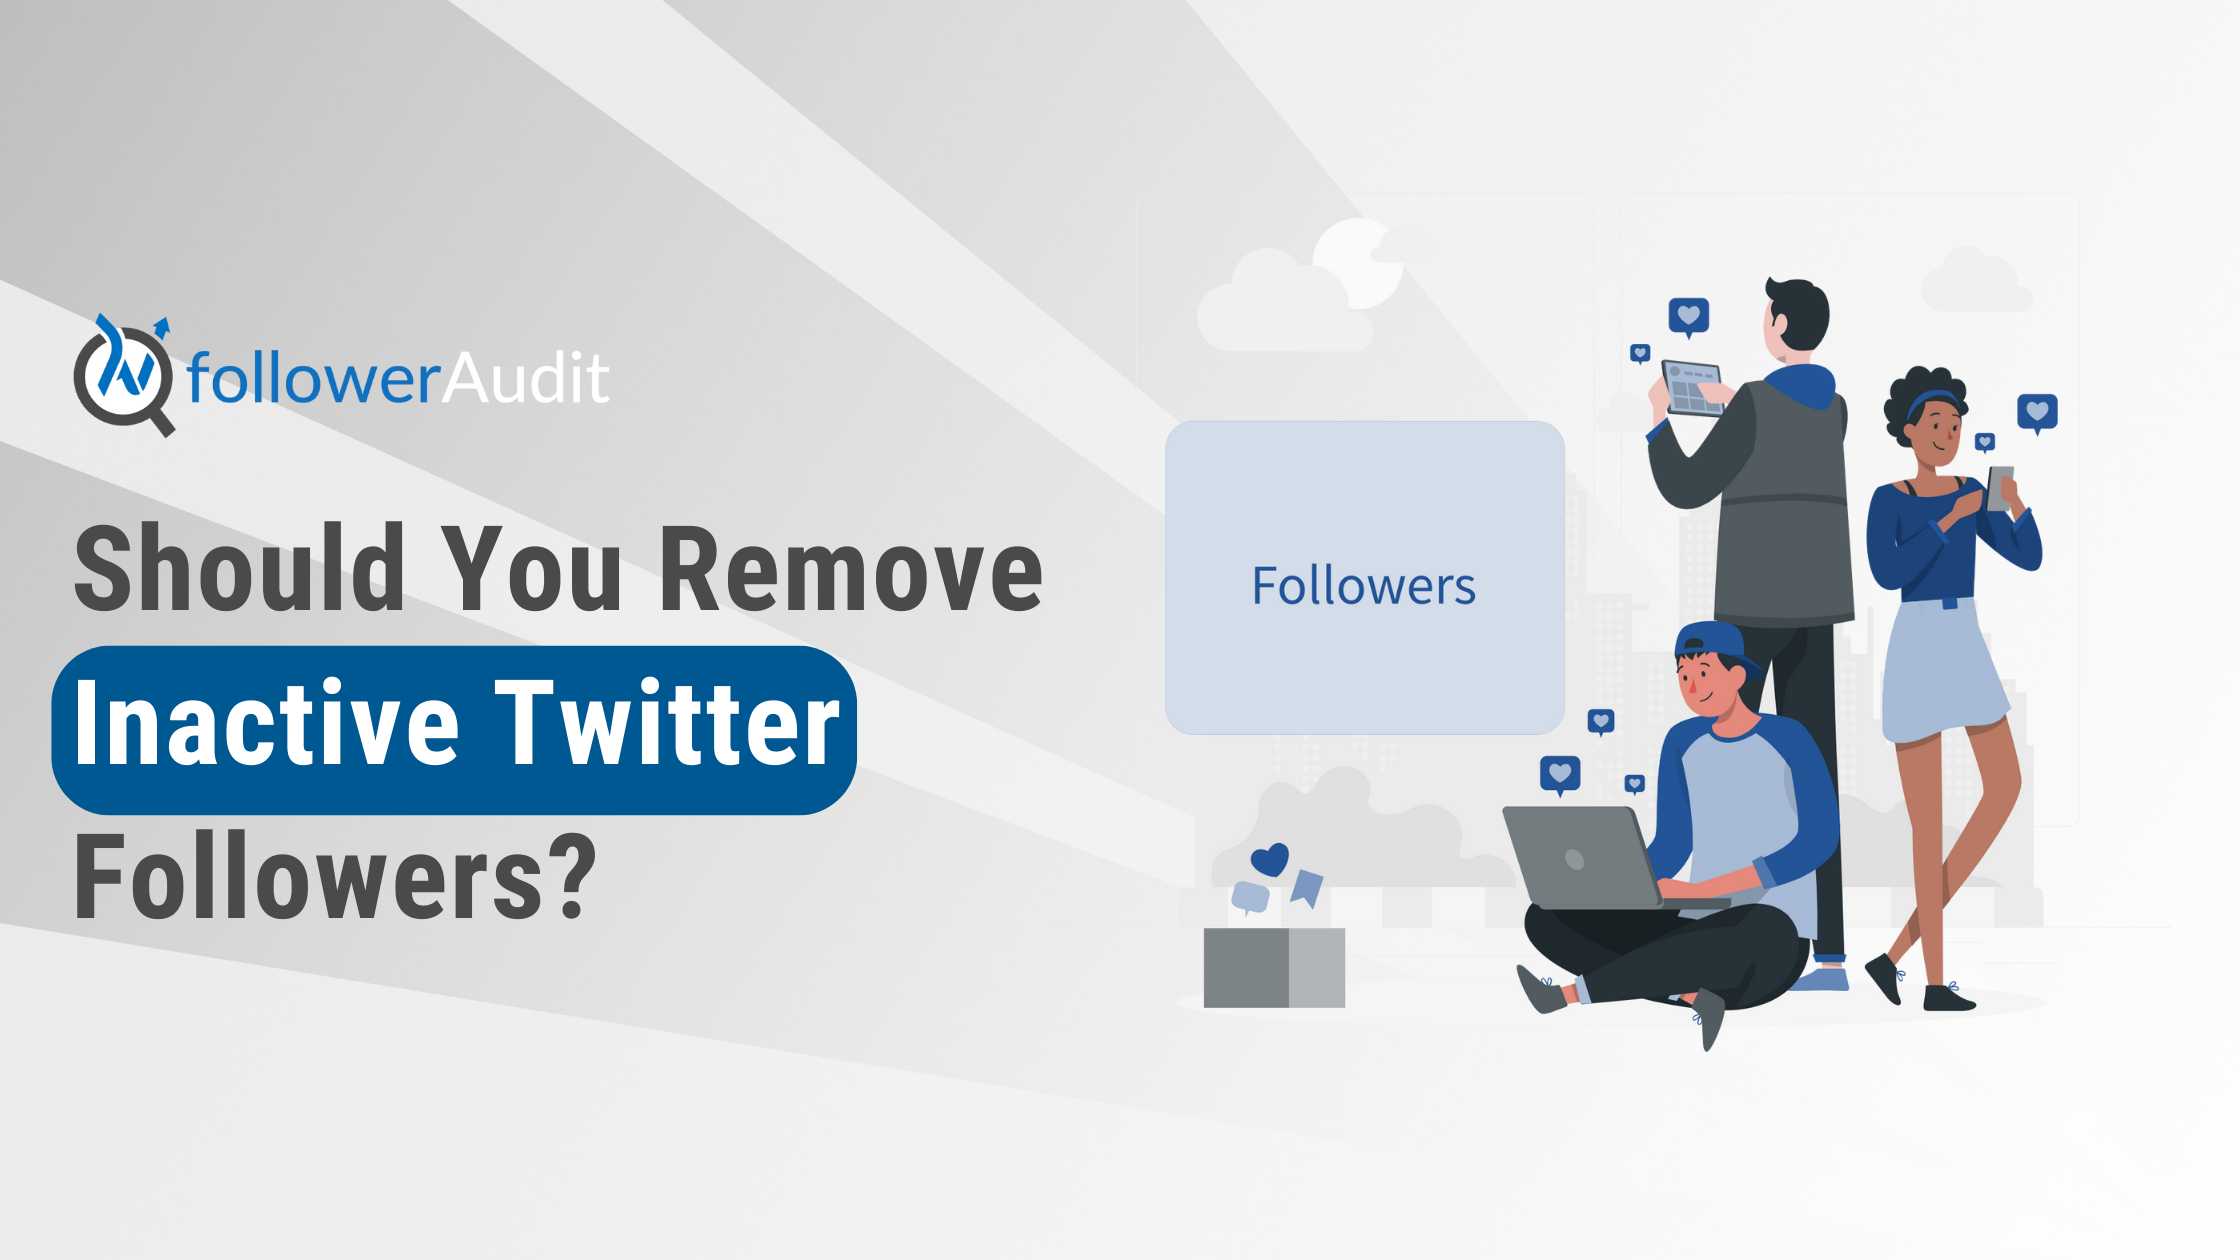 Should you remove inactive Twitter followers?